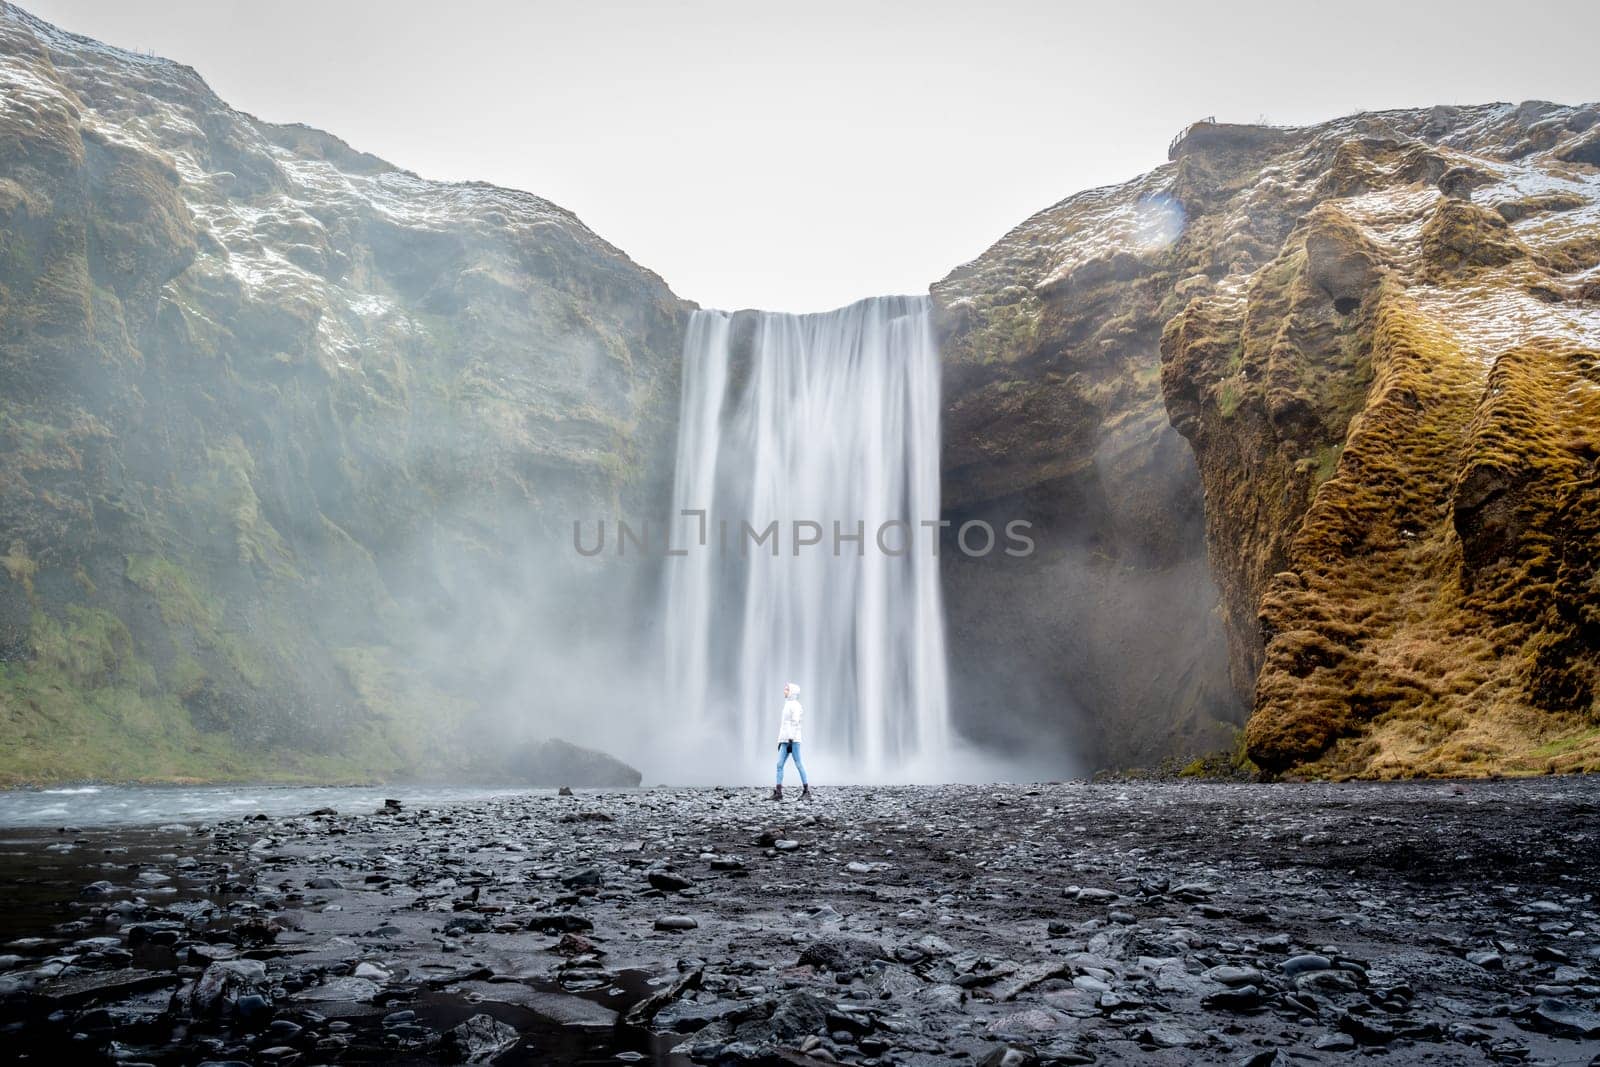 Unknown woman with white jacket from behind in Skogafoss, Iceland